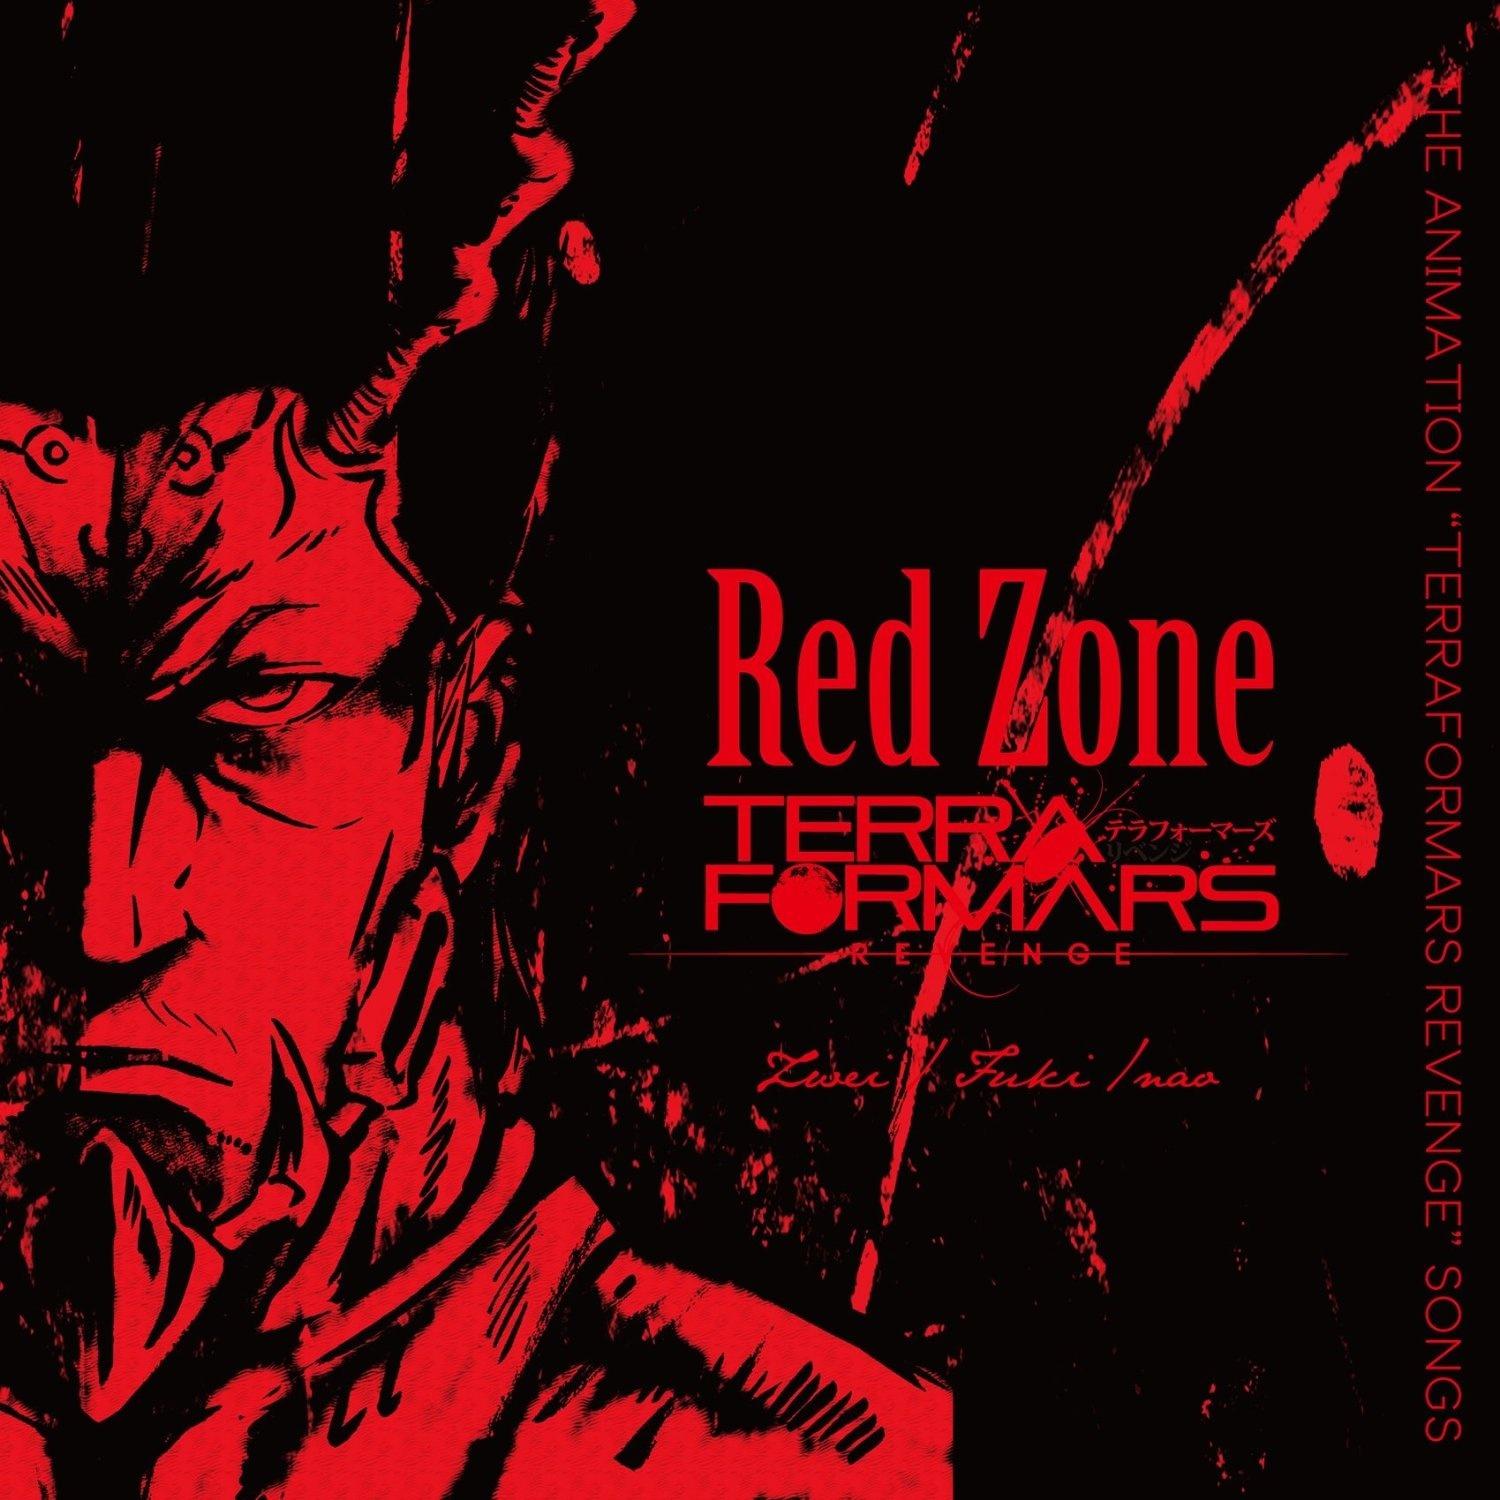 Red Zone (off vocal)